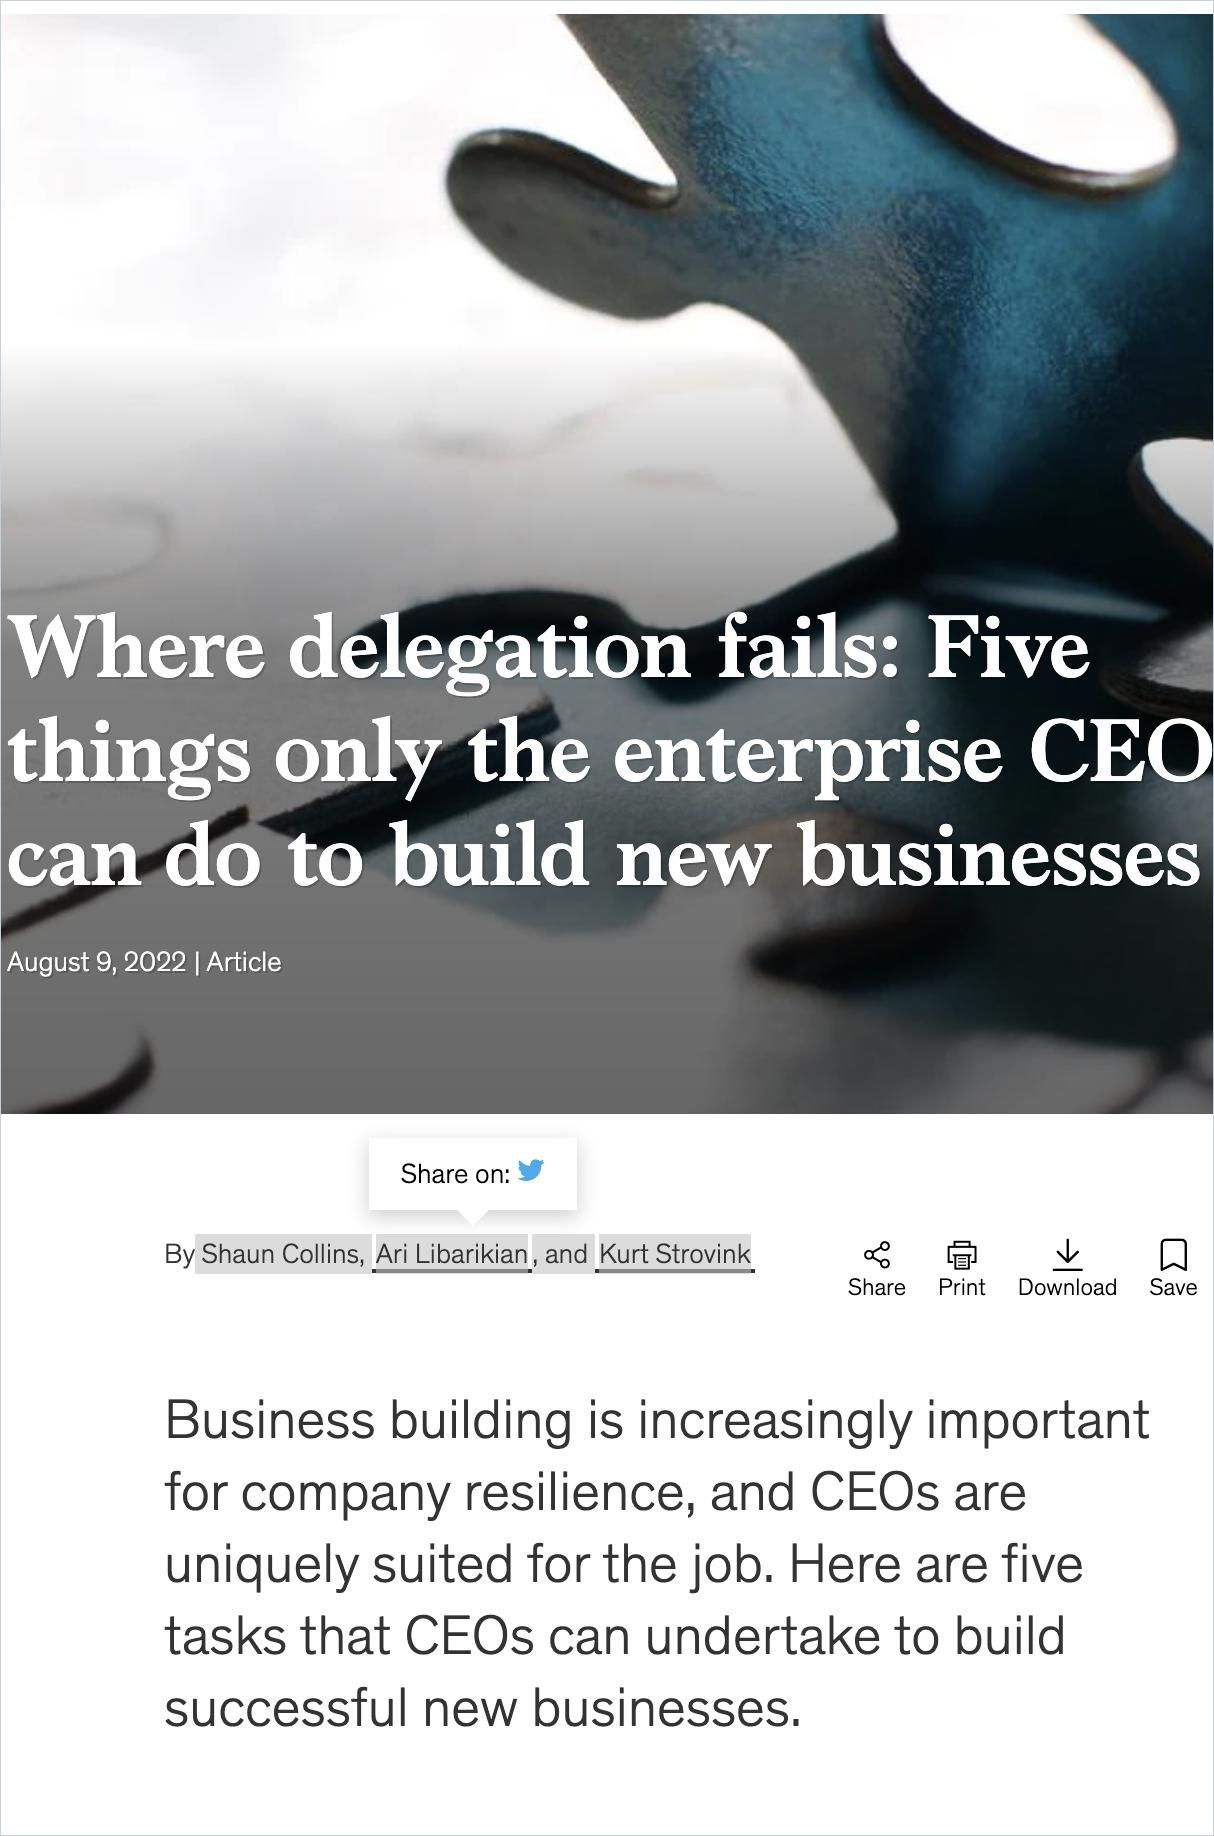 Image of: Where Delegation fails: Five things only the enterprise CEO can do to build new business